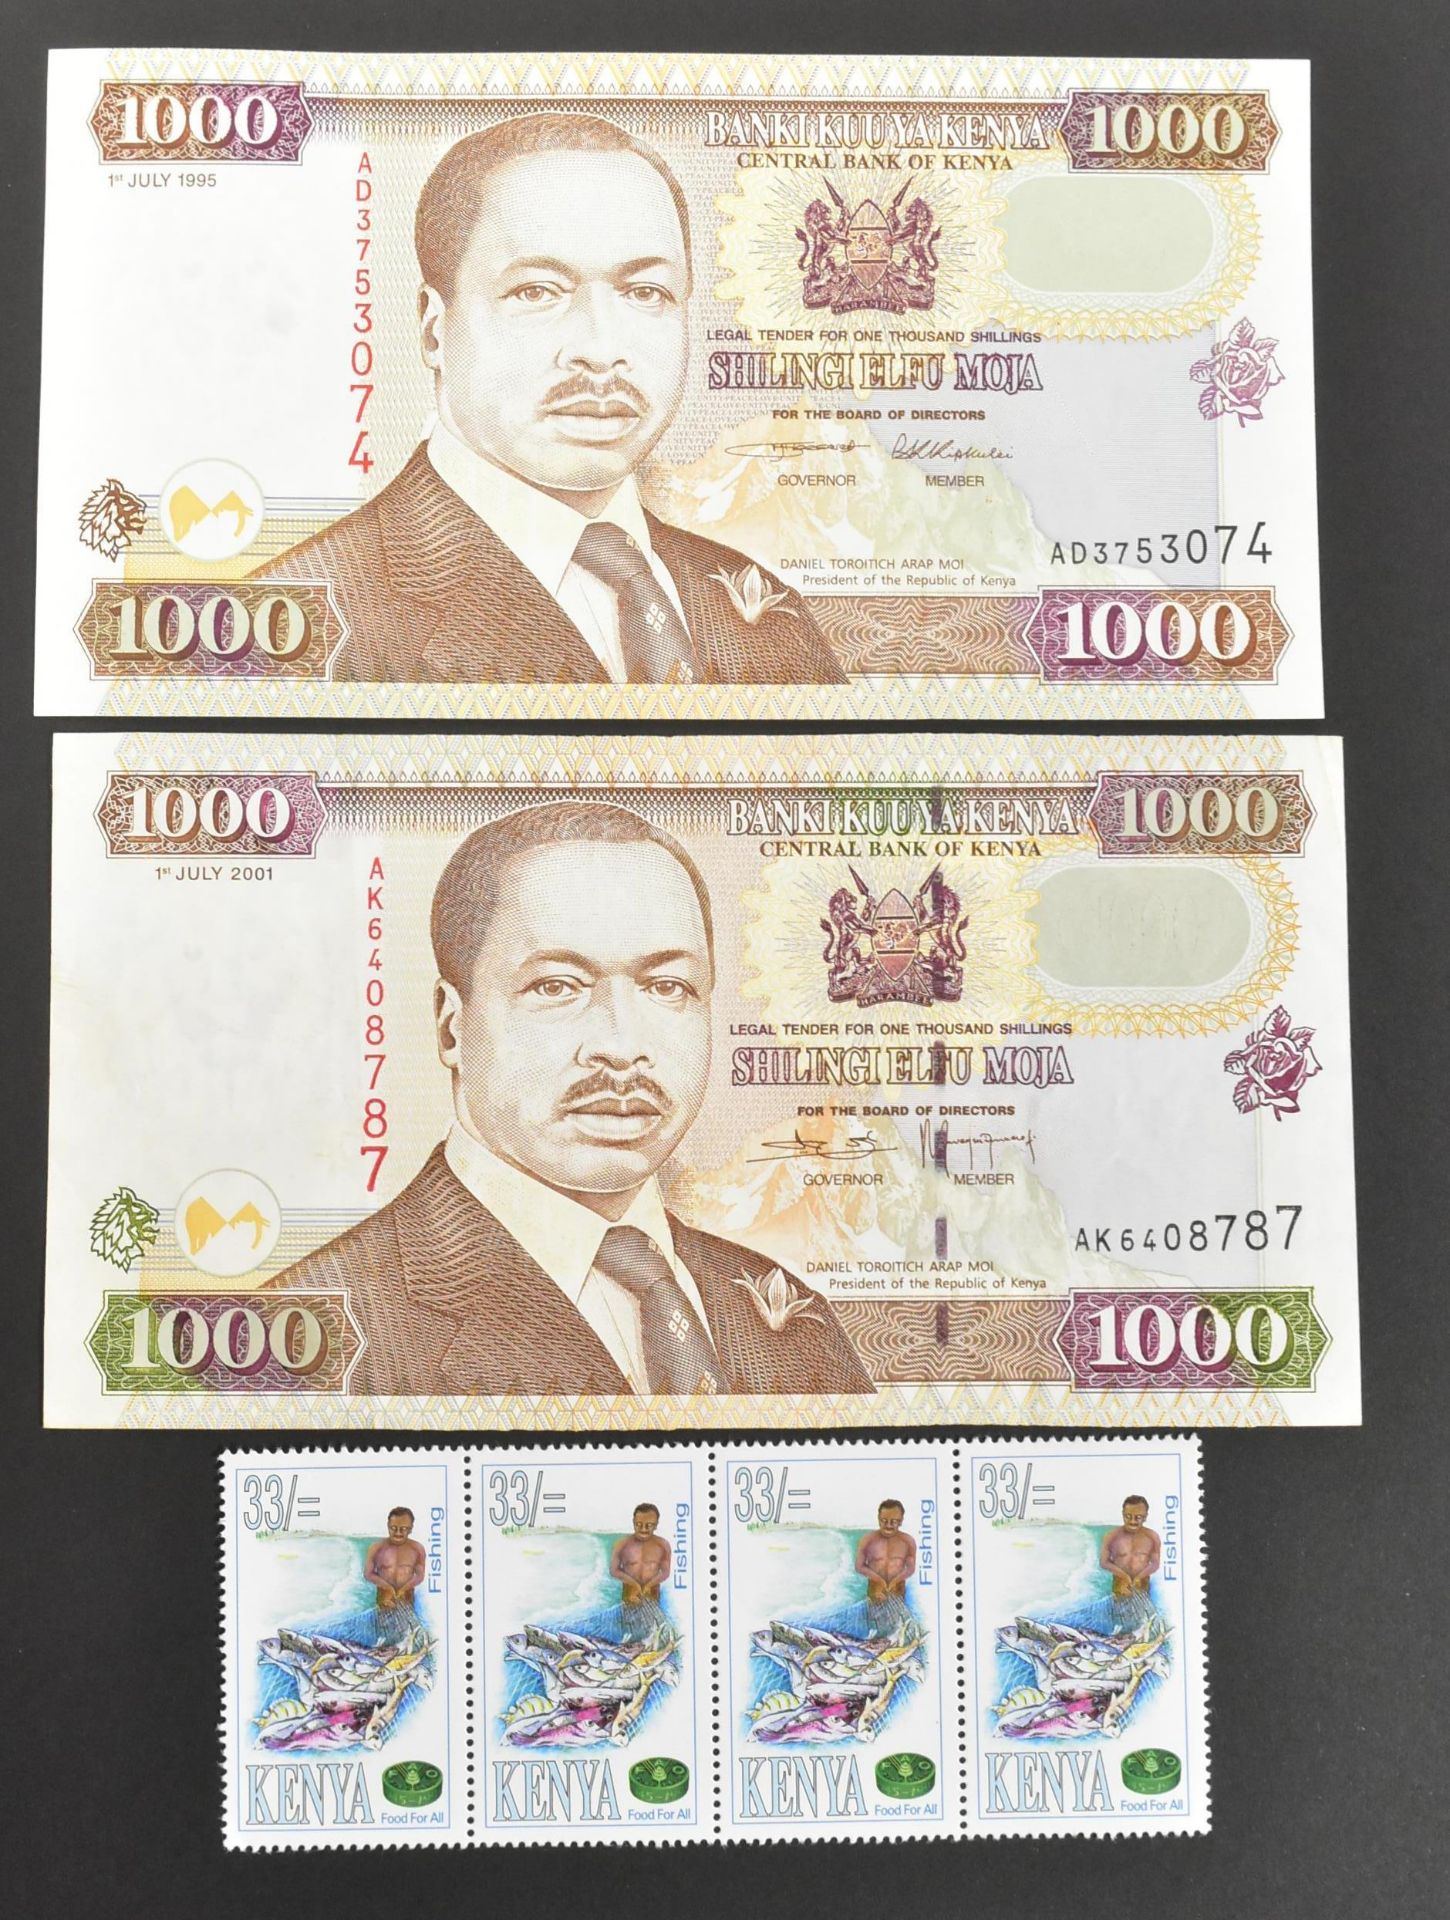 INTERNATIONAL UNCIRCULATED BANK NOTES - AFRICA - Image 19 of 28